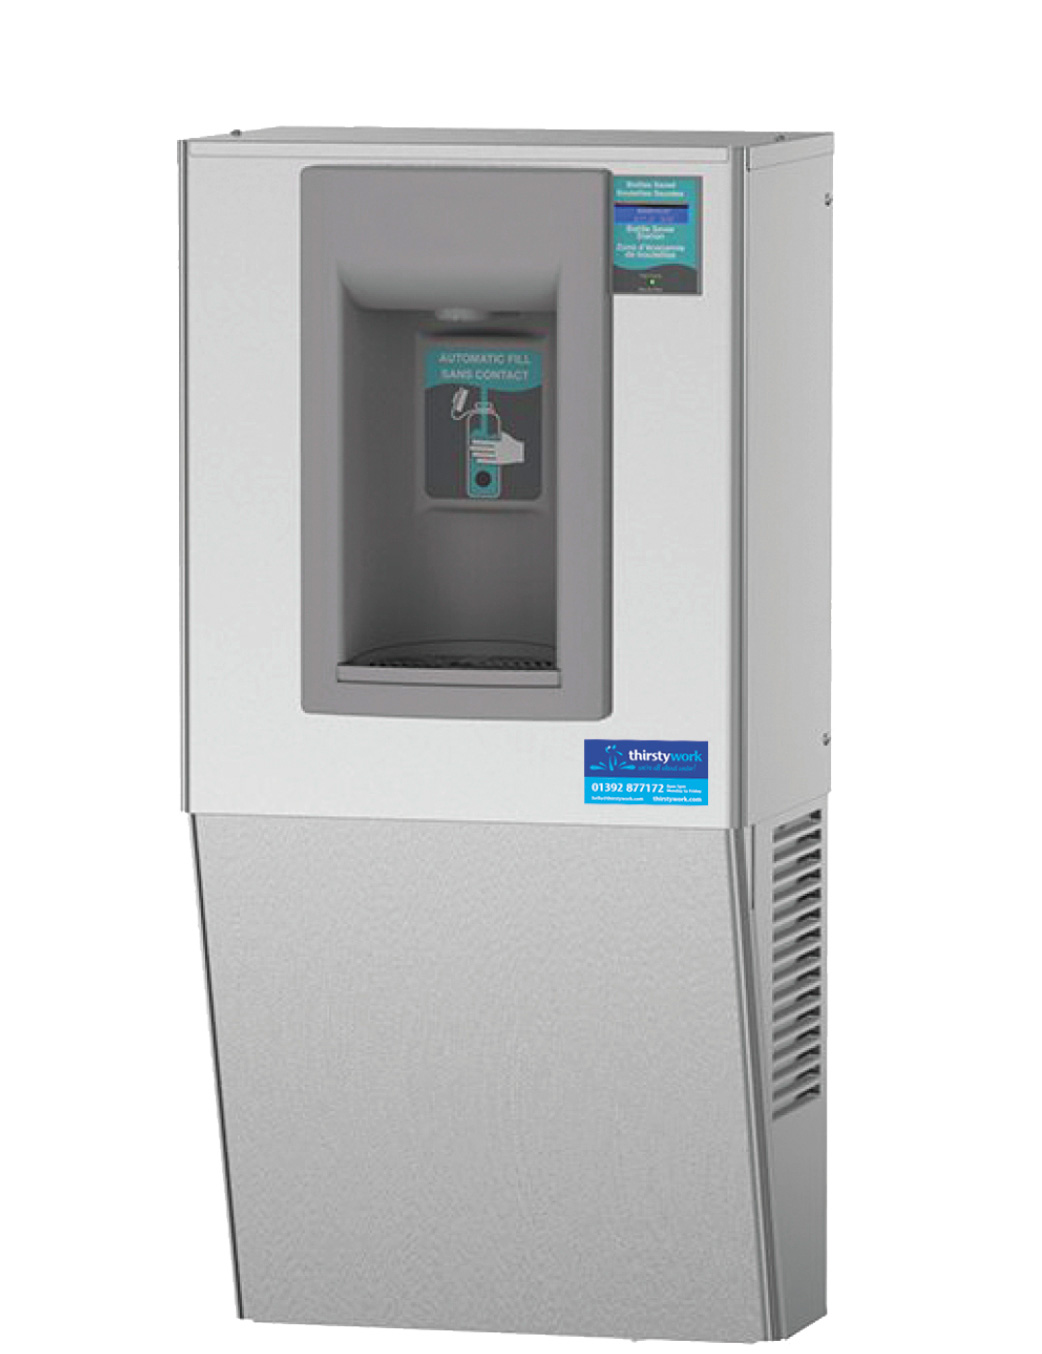 Aquapointe-R chilled bottle filler rental for universities